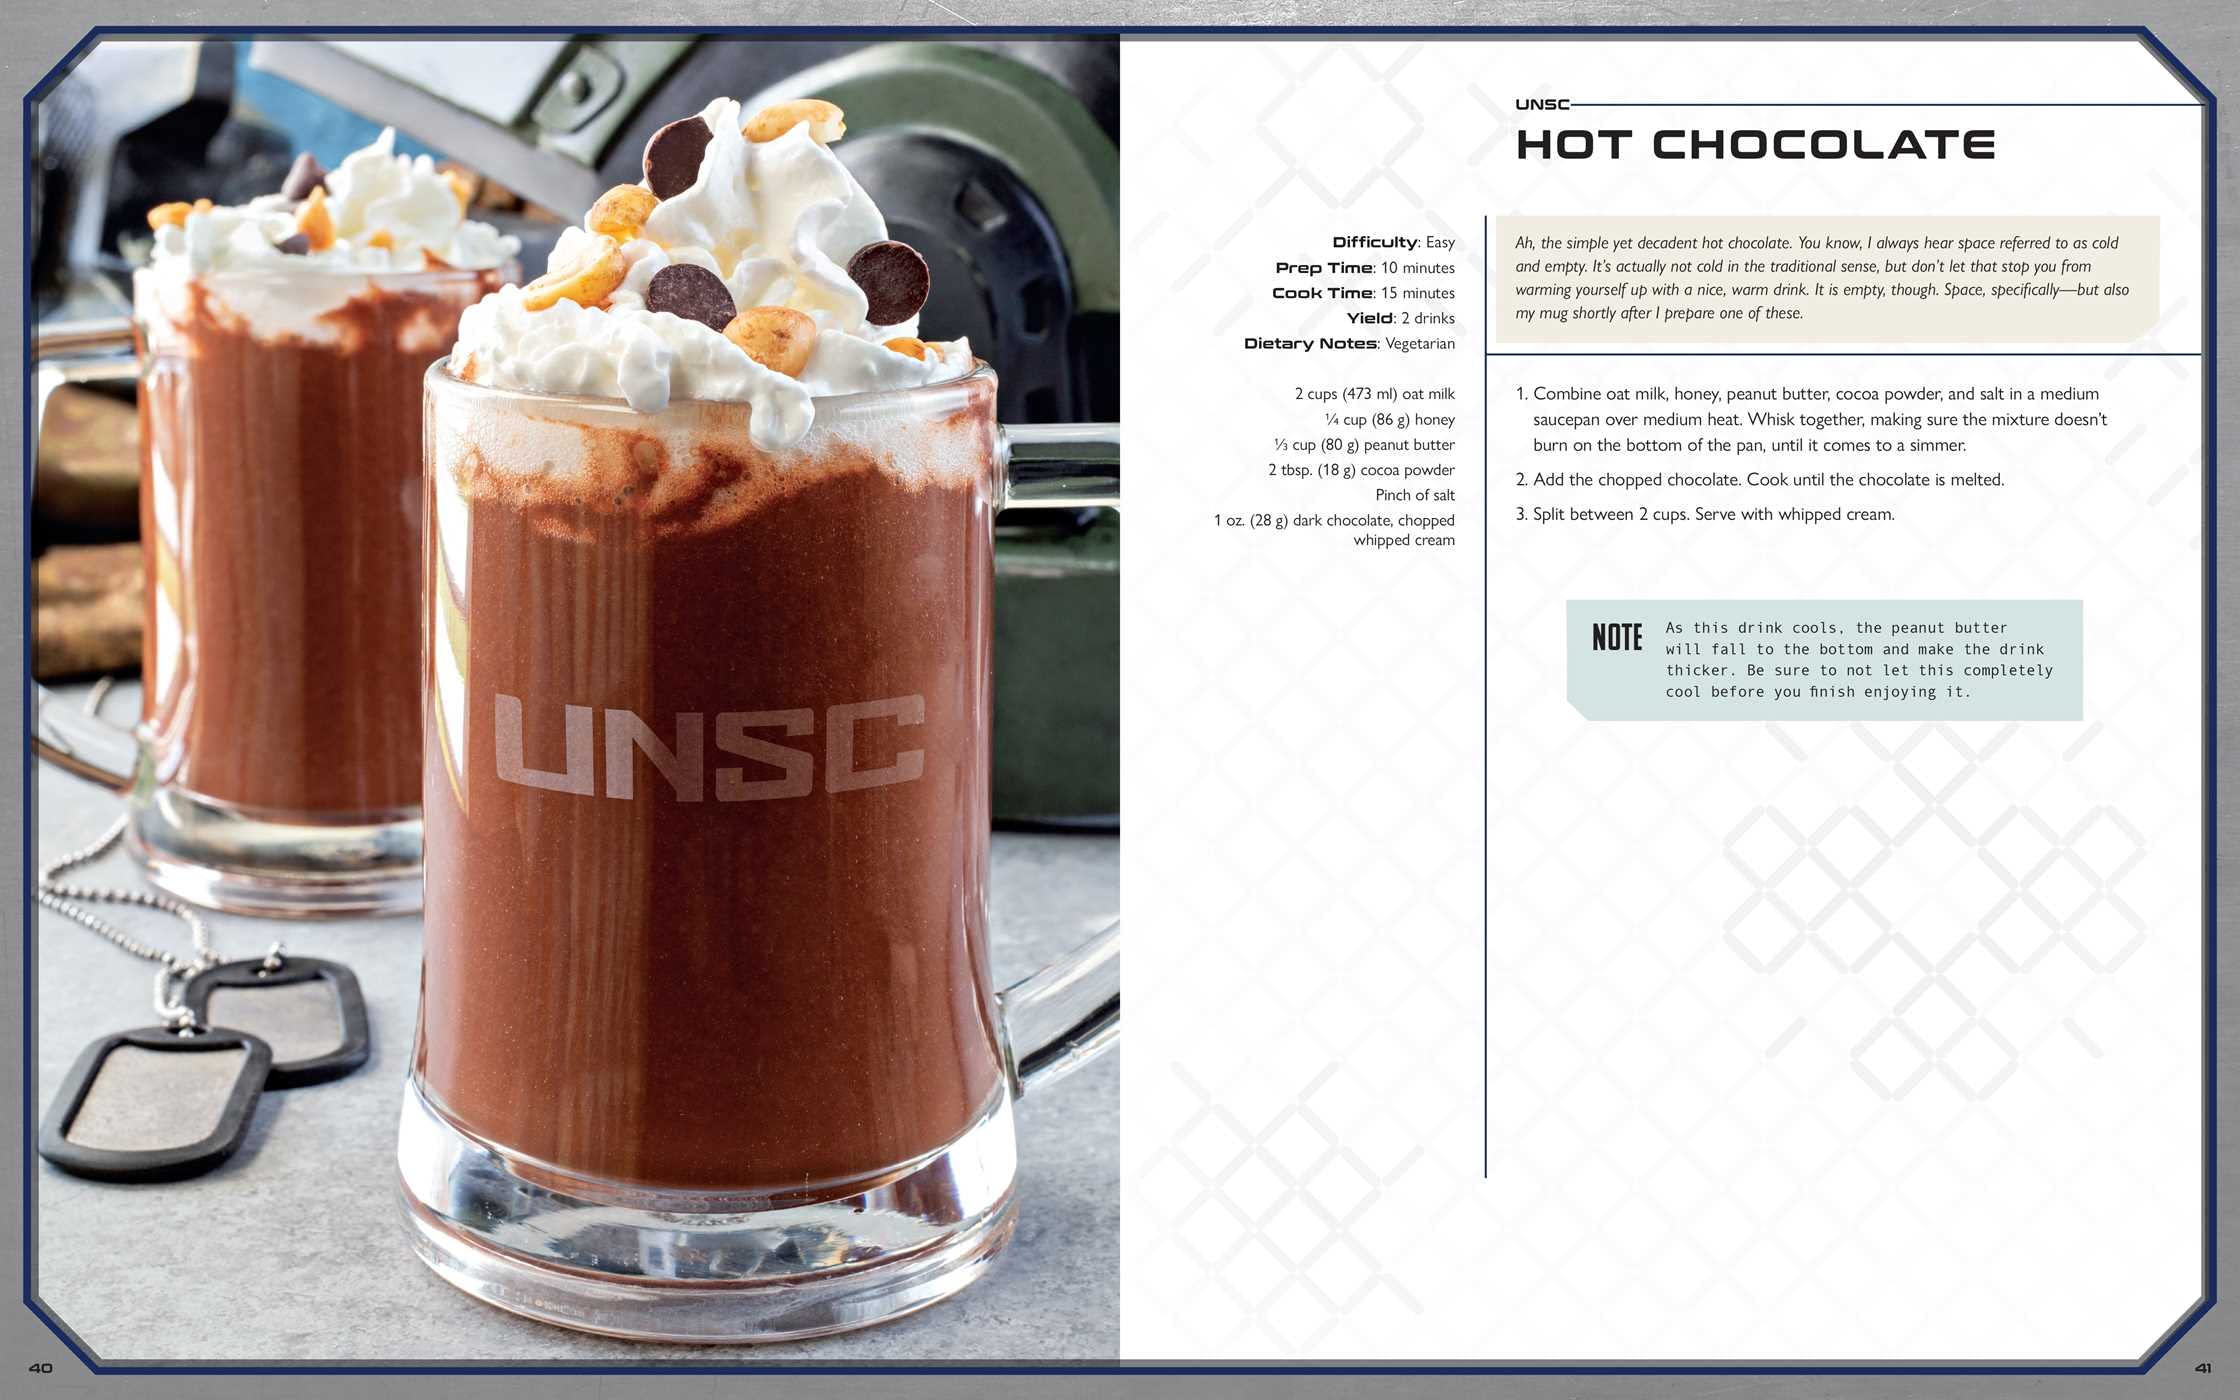 Halo: The Official Cookbook recipe preview for hot chocolate